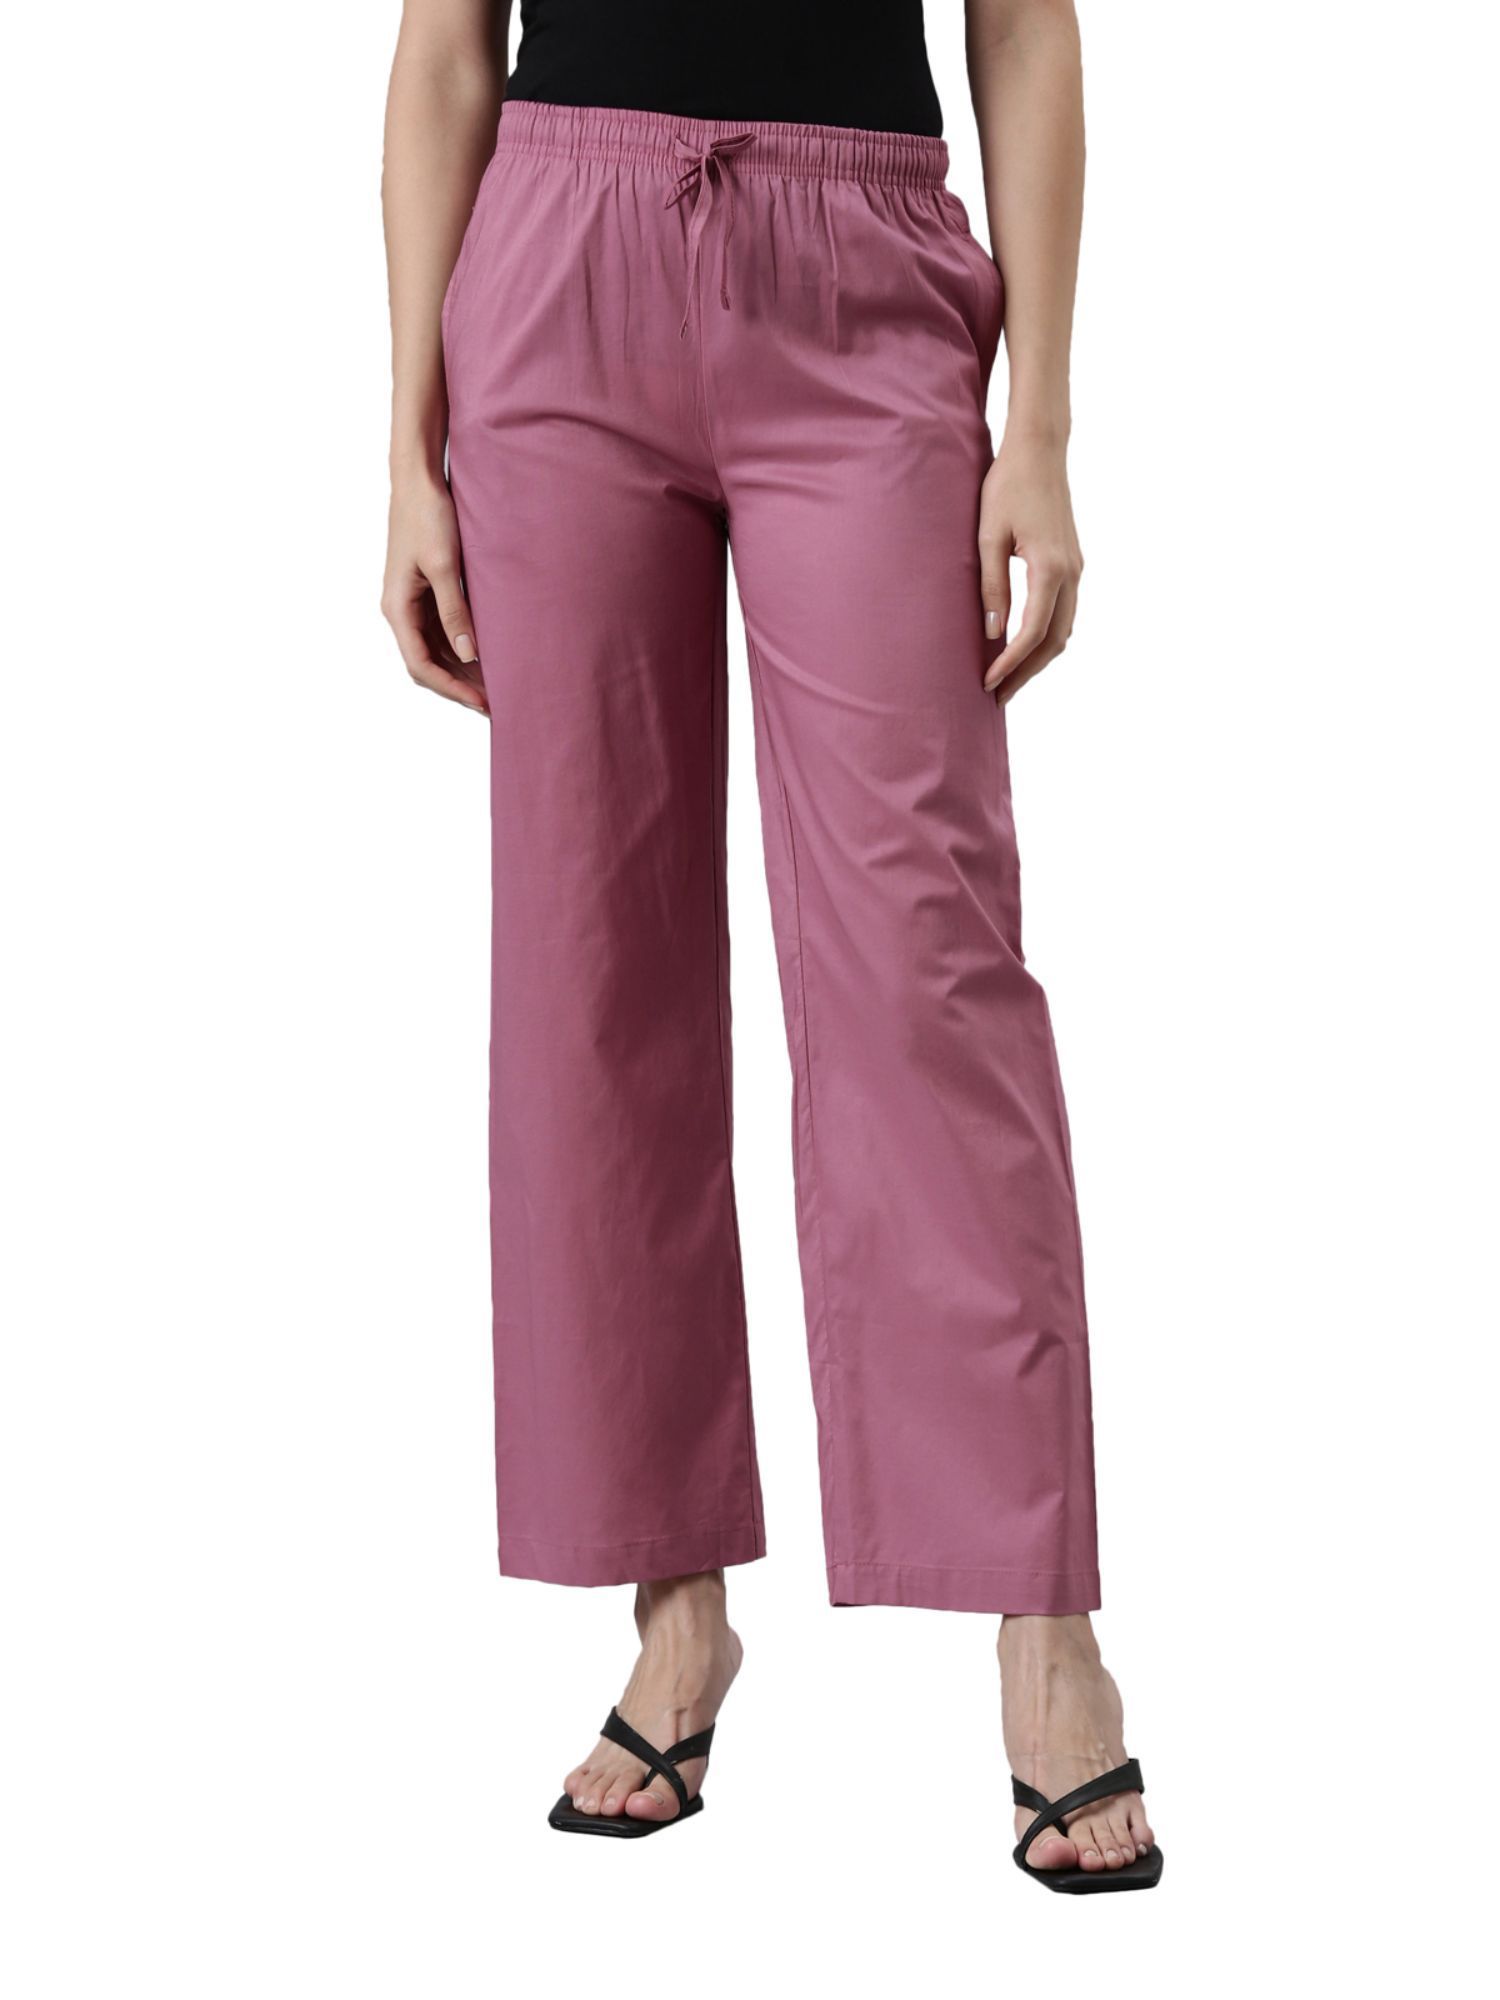 Buy Online Cavern Clay Straight Cotton Flax Pants for Women  Girls at Best  Prices in Biba IndiaBOT